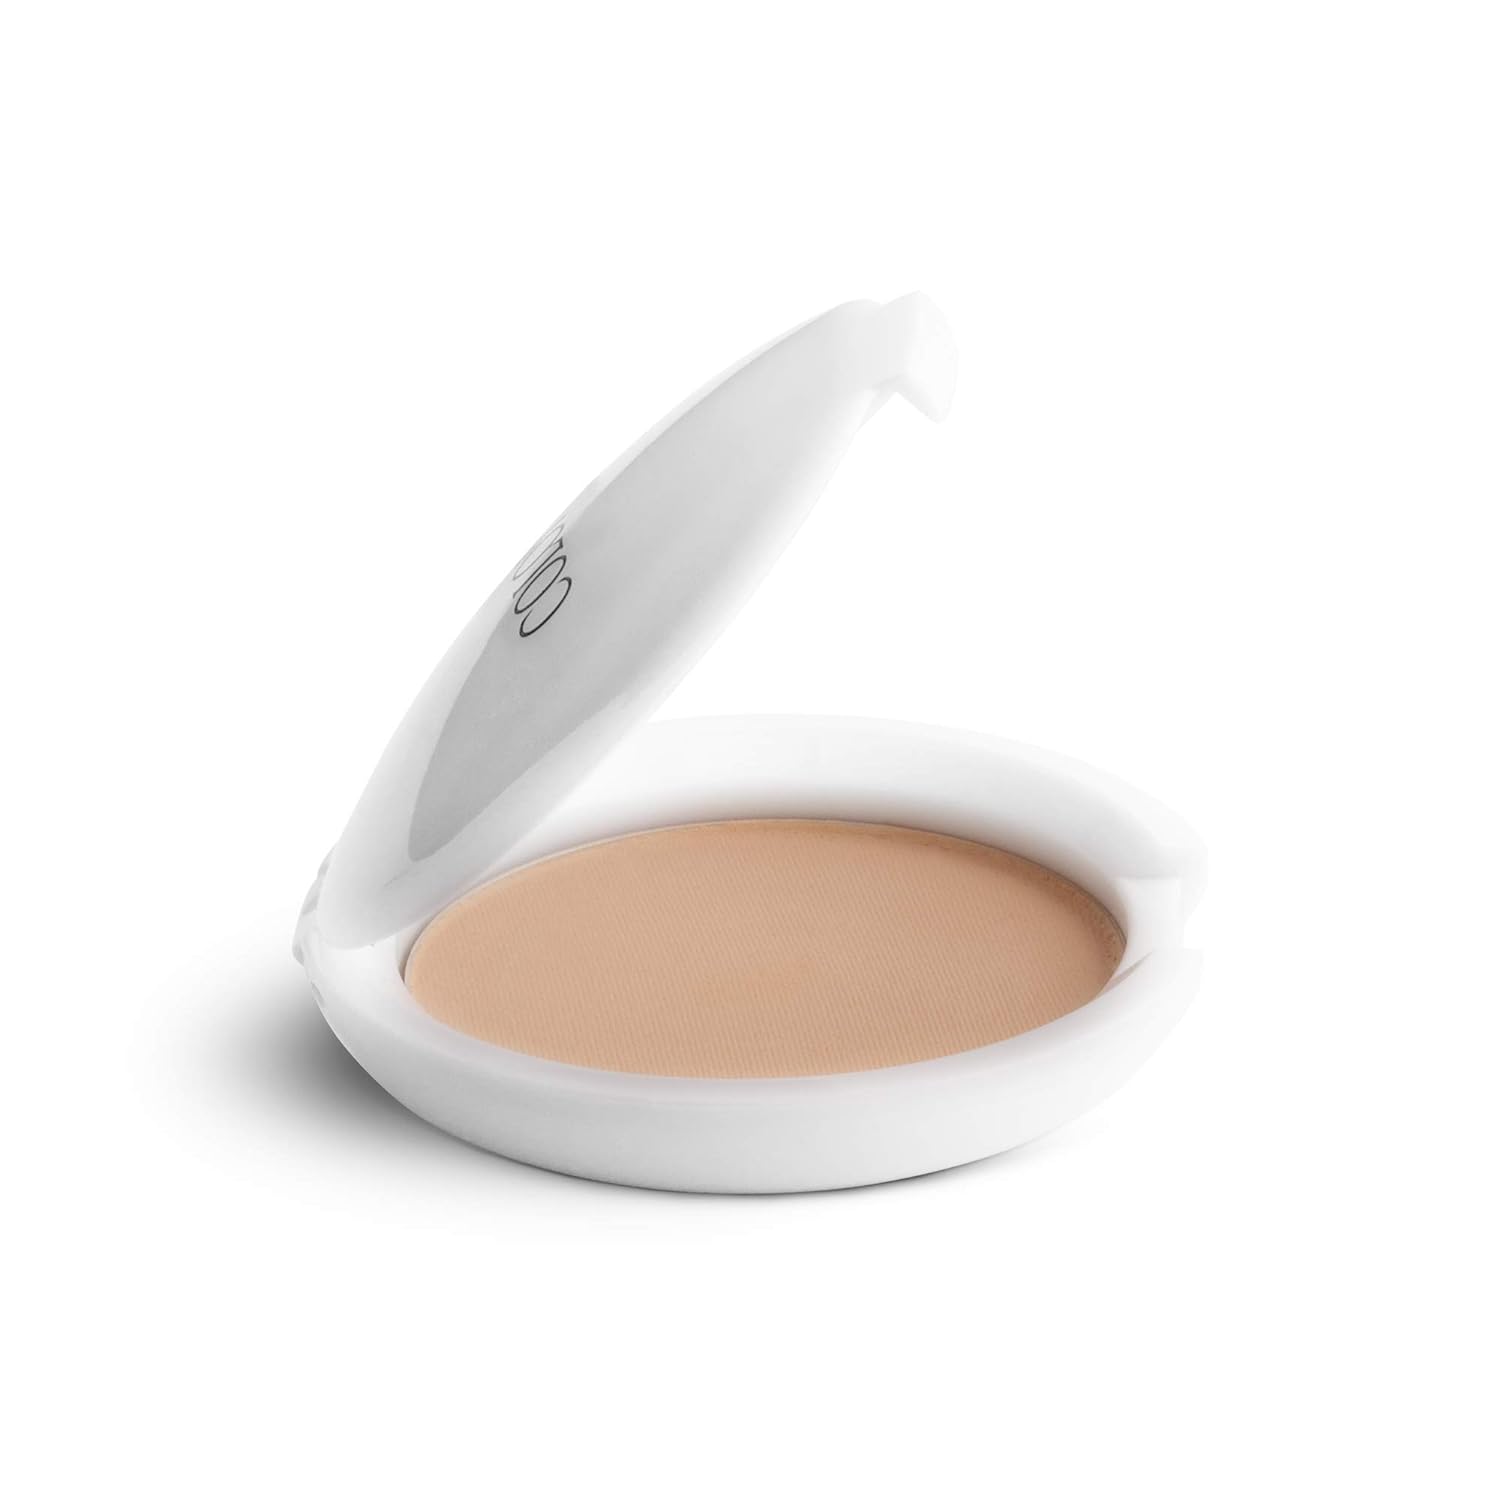 Colorbar Radiant White UV Compact Powder, JUST BEIGE 04, 9g